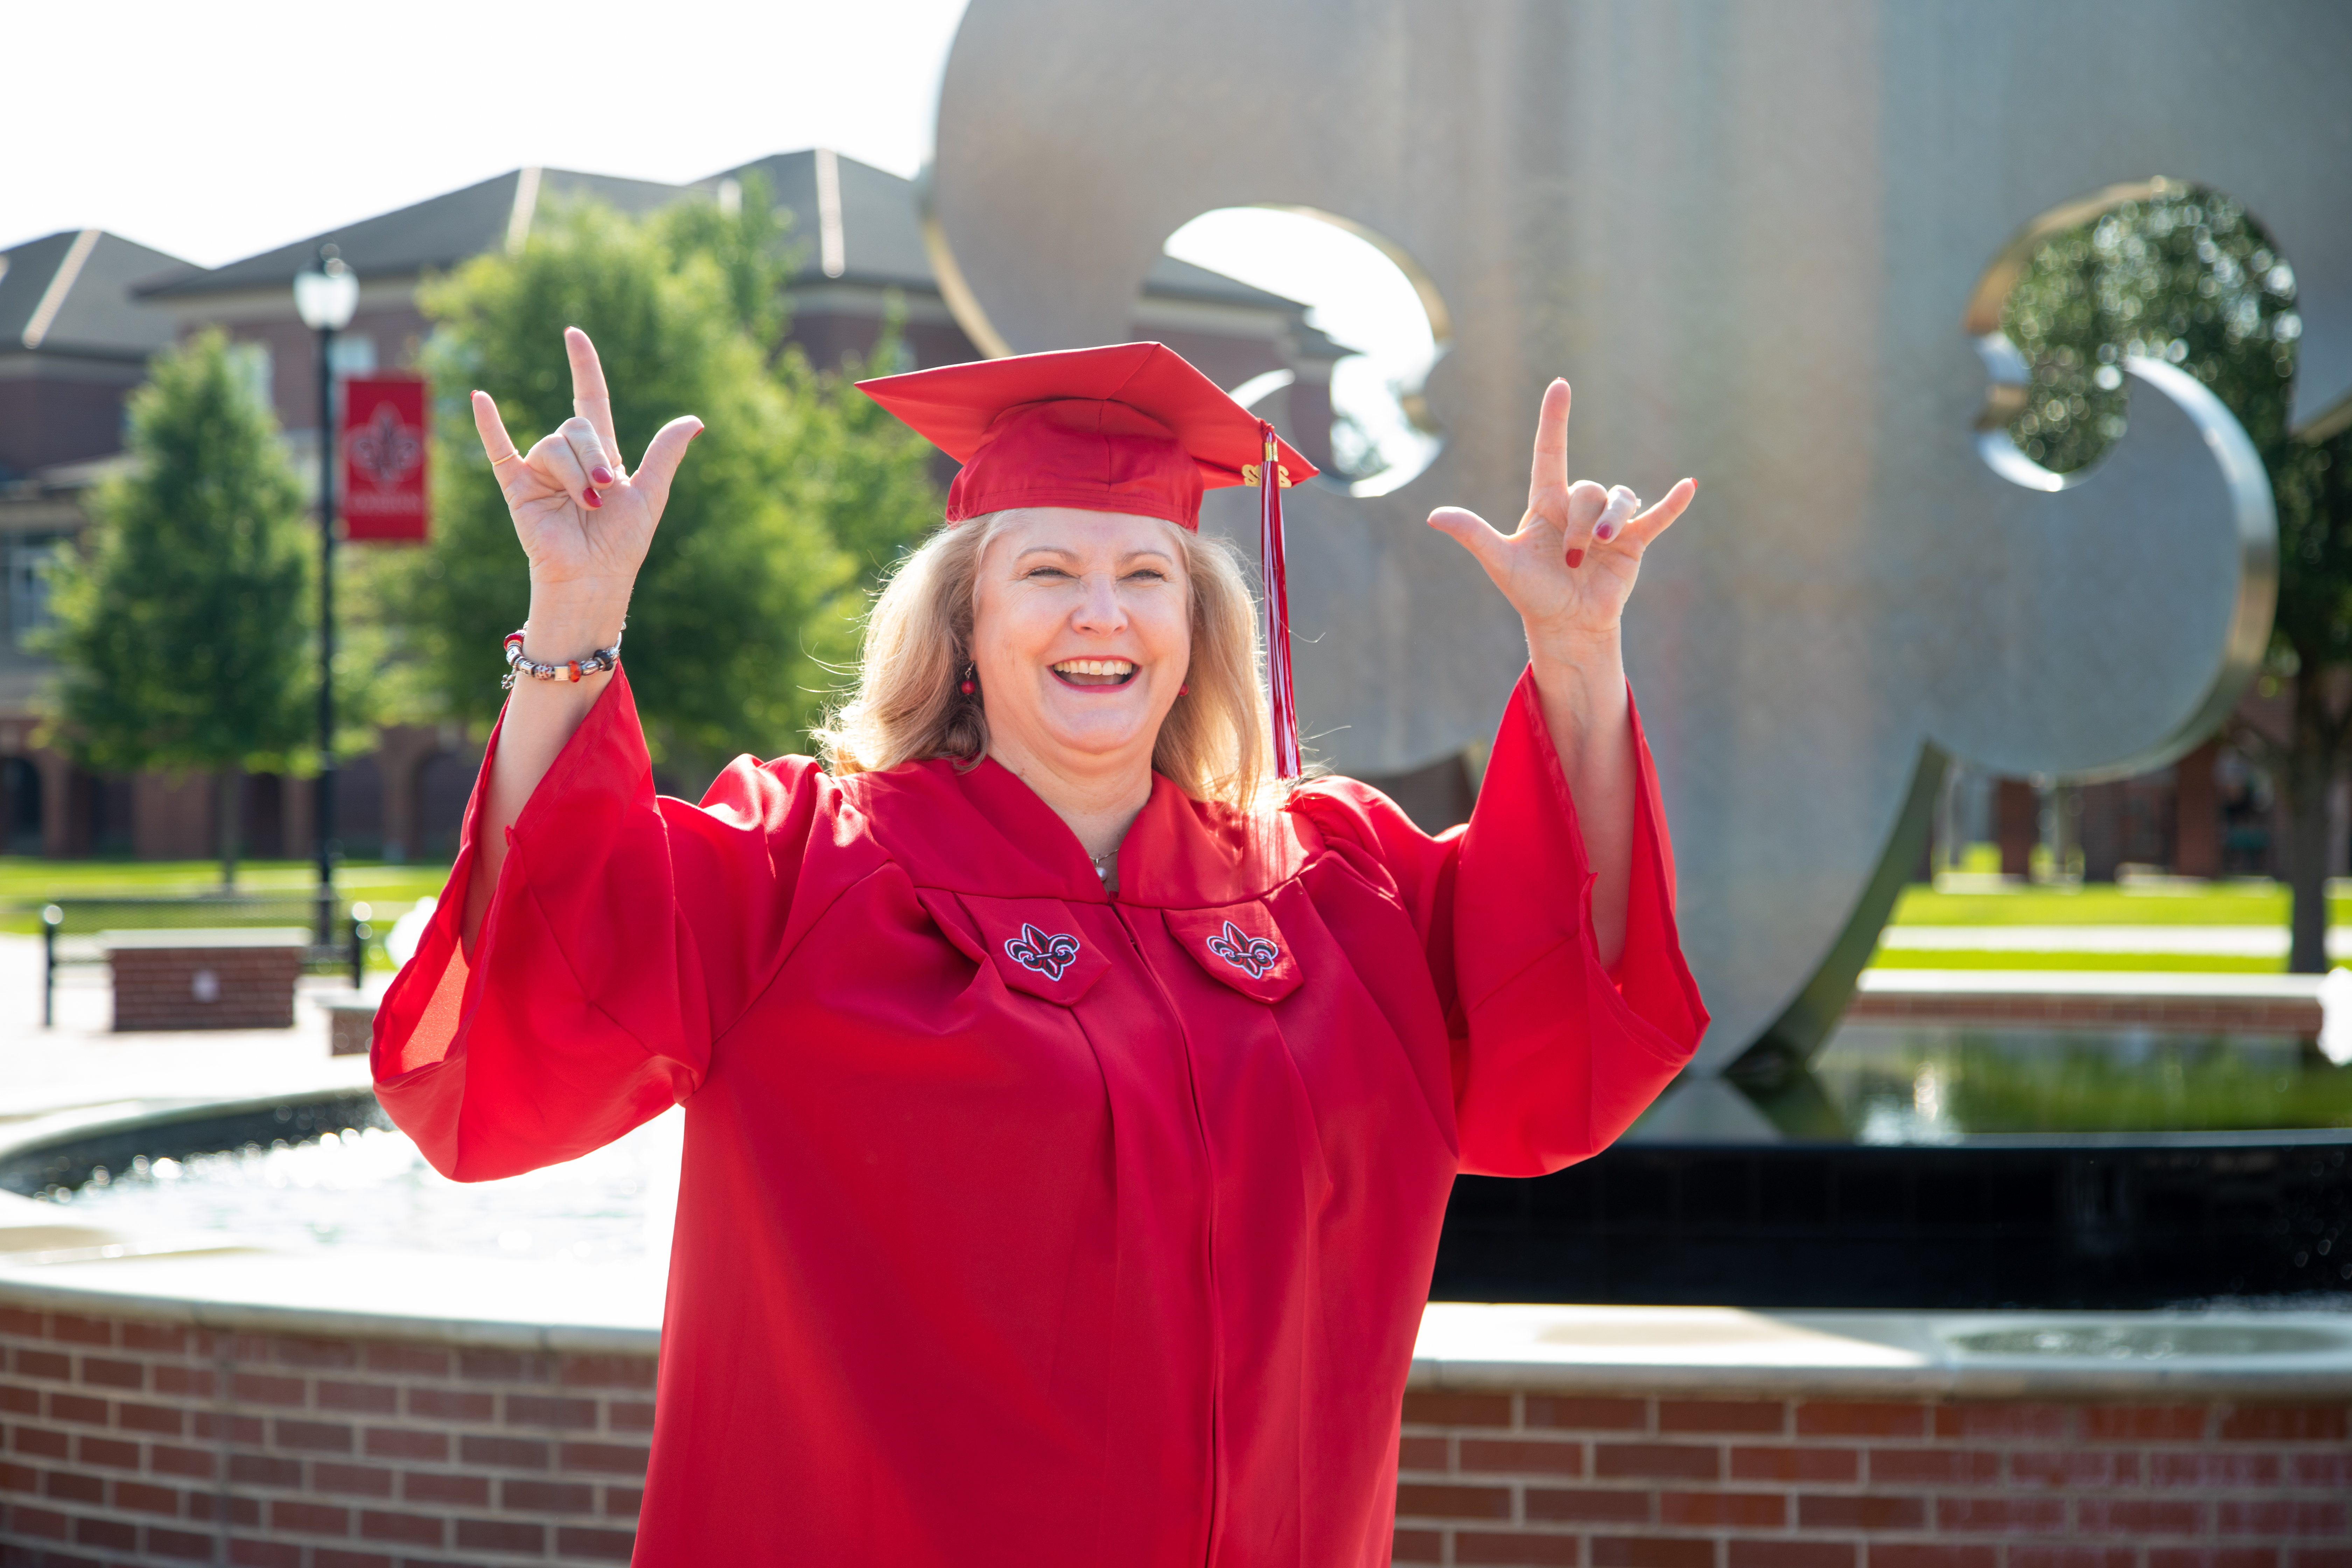 Melanie Fontenot, Bachelor of General Studies Online graduate, is pictured in a red cap and gown in front of the UL Lafayette fleur de lis fountain.